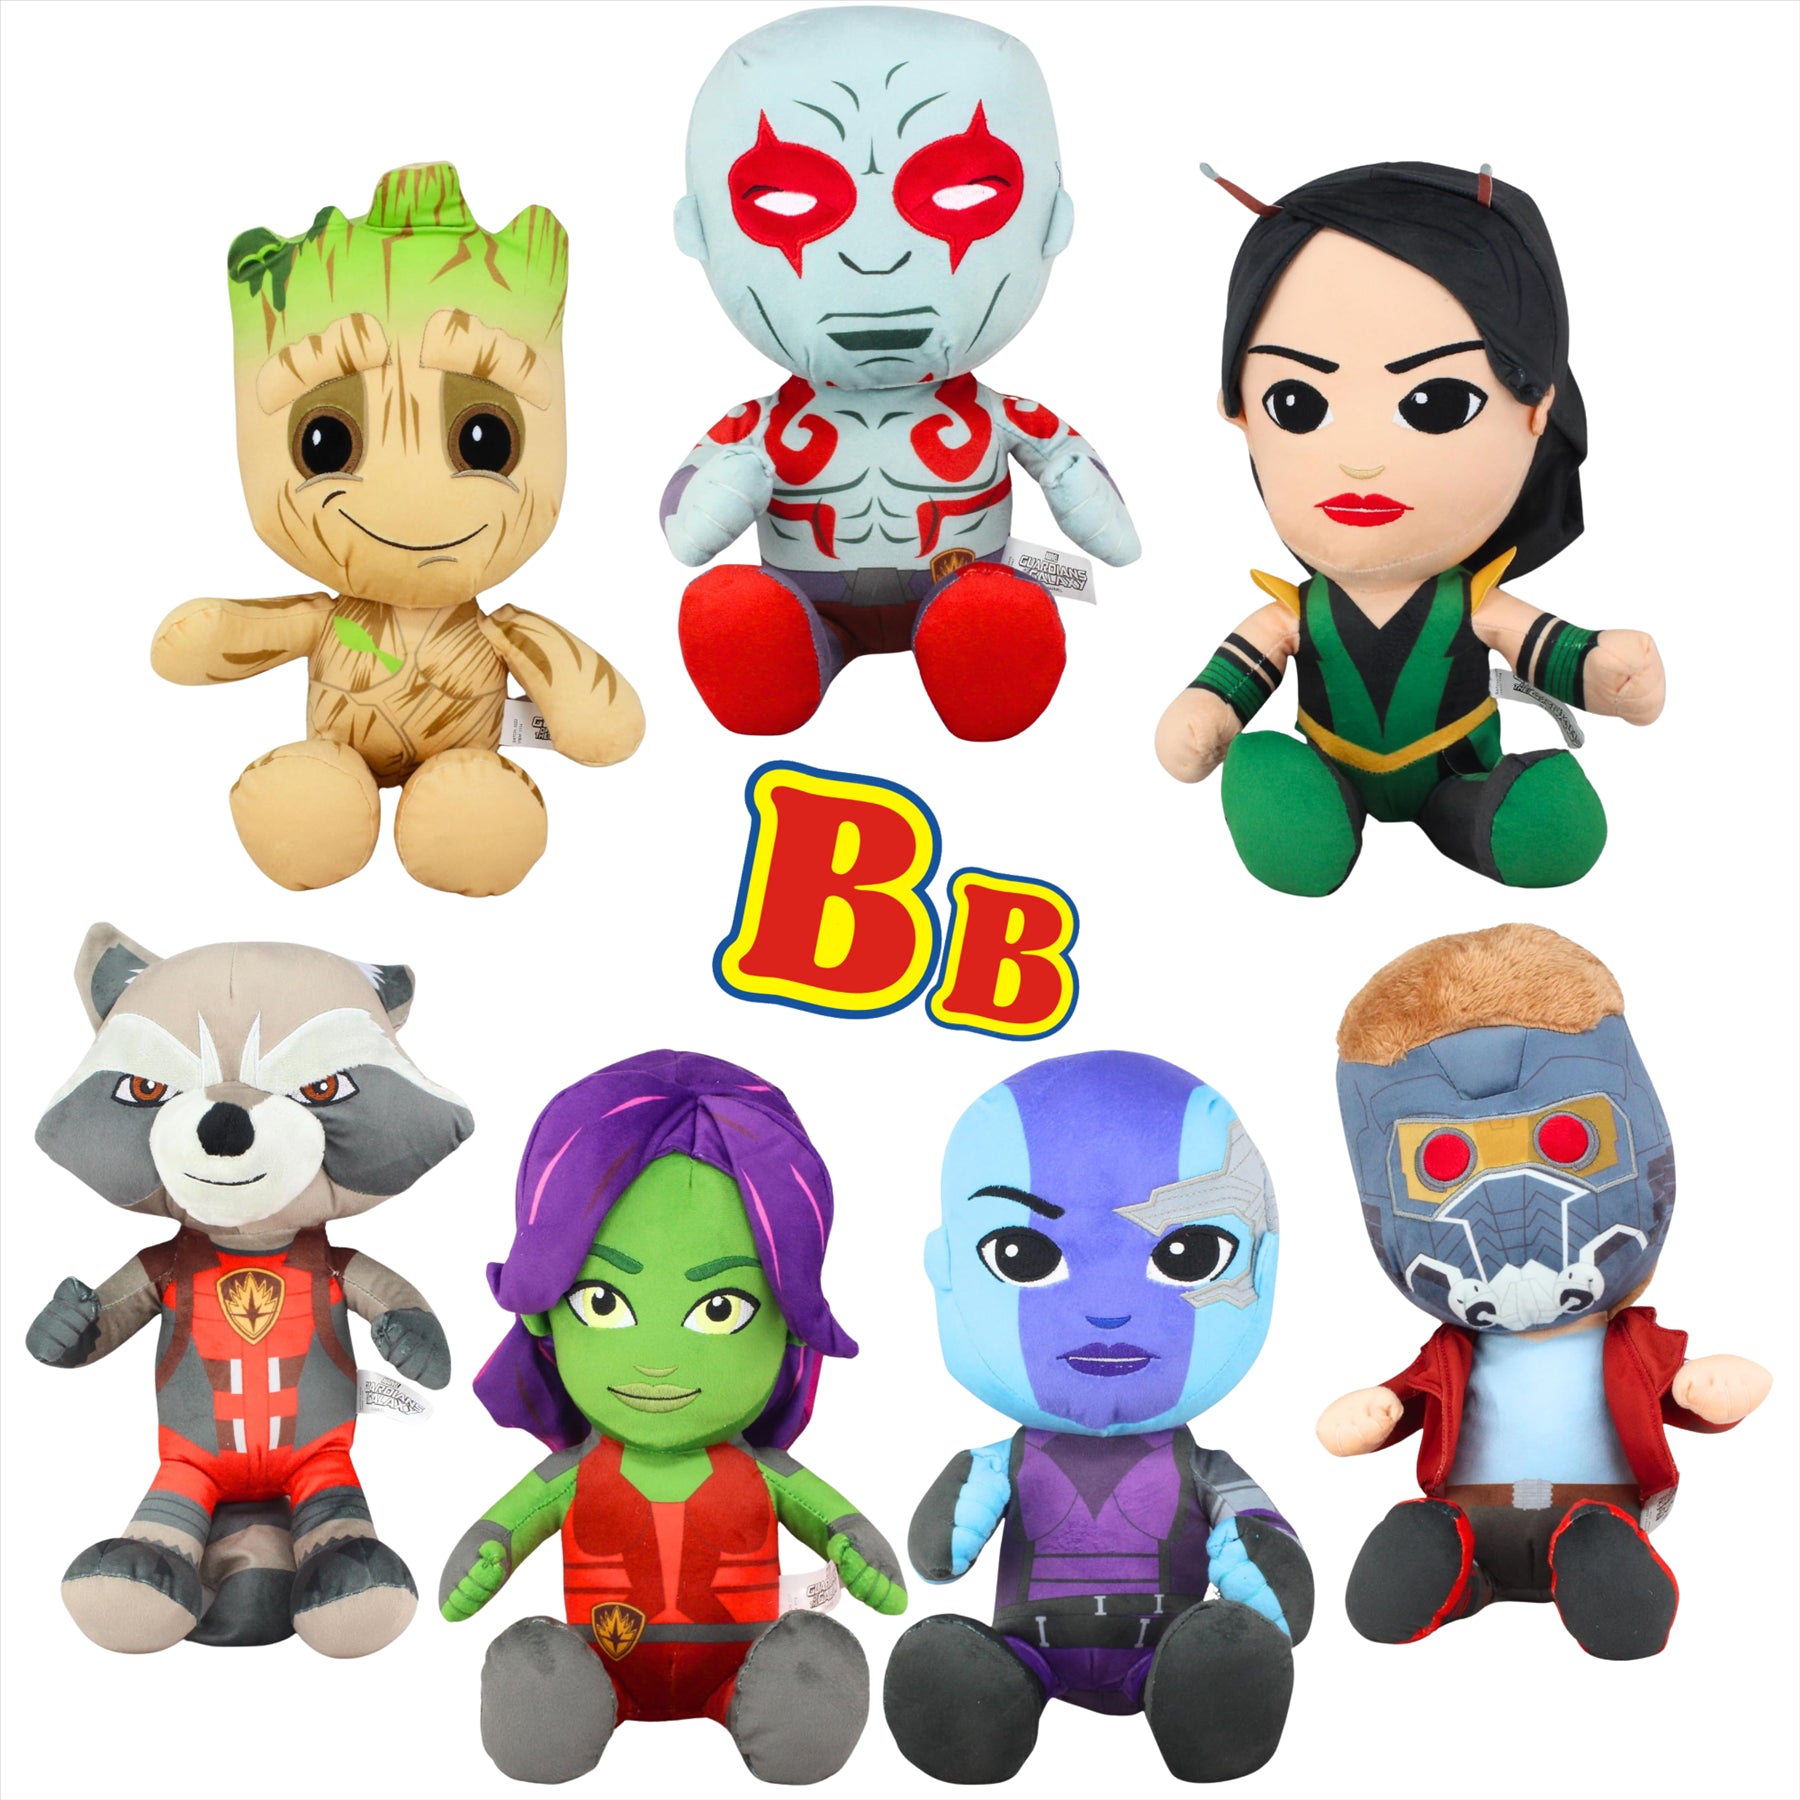 Guardians of the Galaxy Avengers Super Soft Embroidered 36cm Plush Toys - Set of All 7